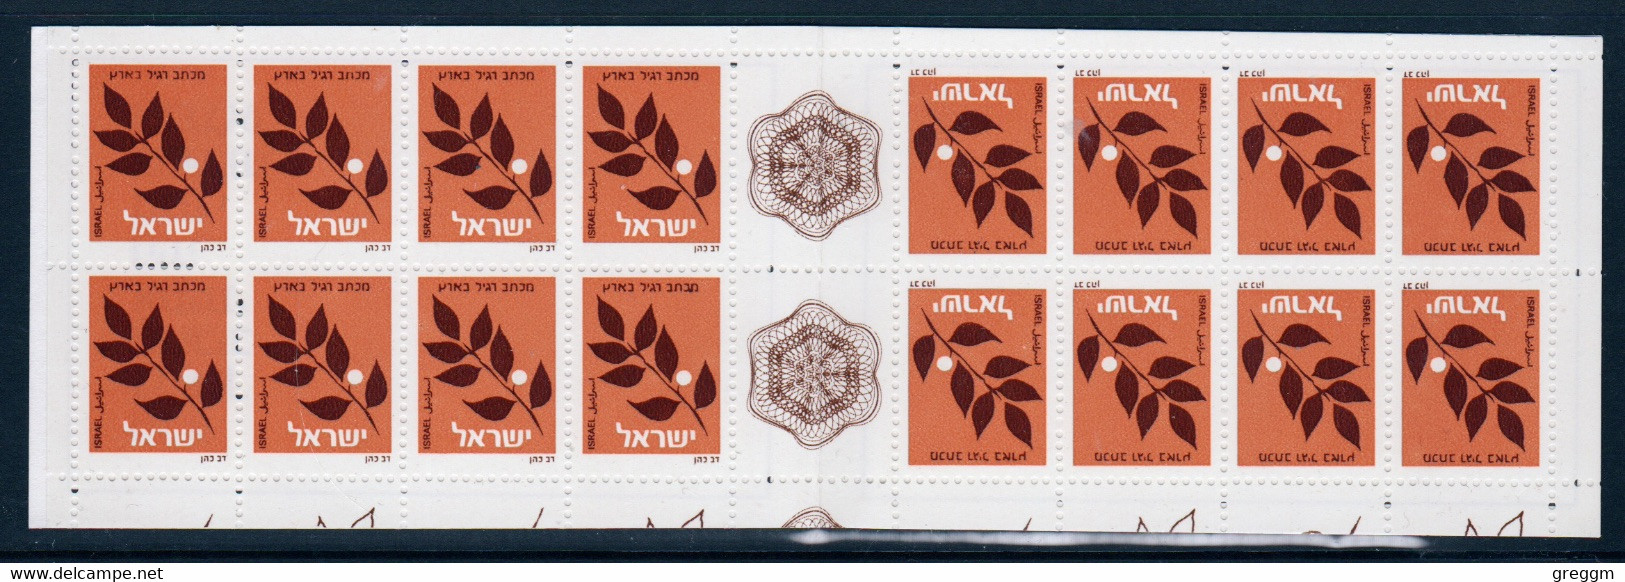 Israel 1982 Booklet Containing 16 Definitive Stamps In Unmounted Mint - Booklets